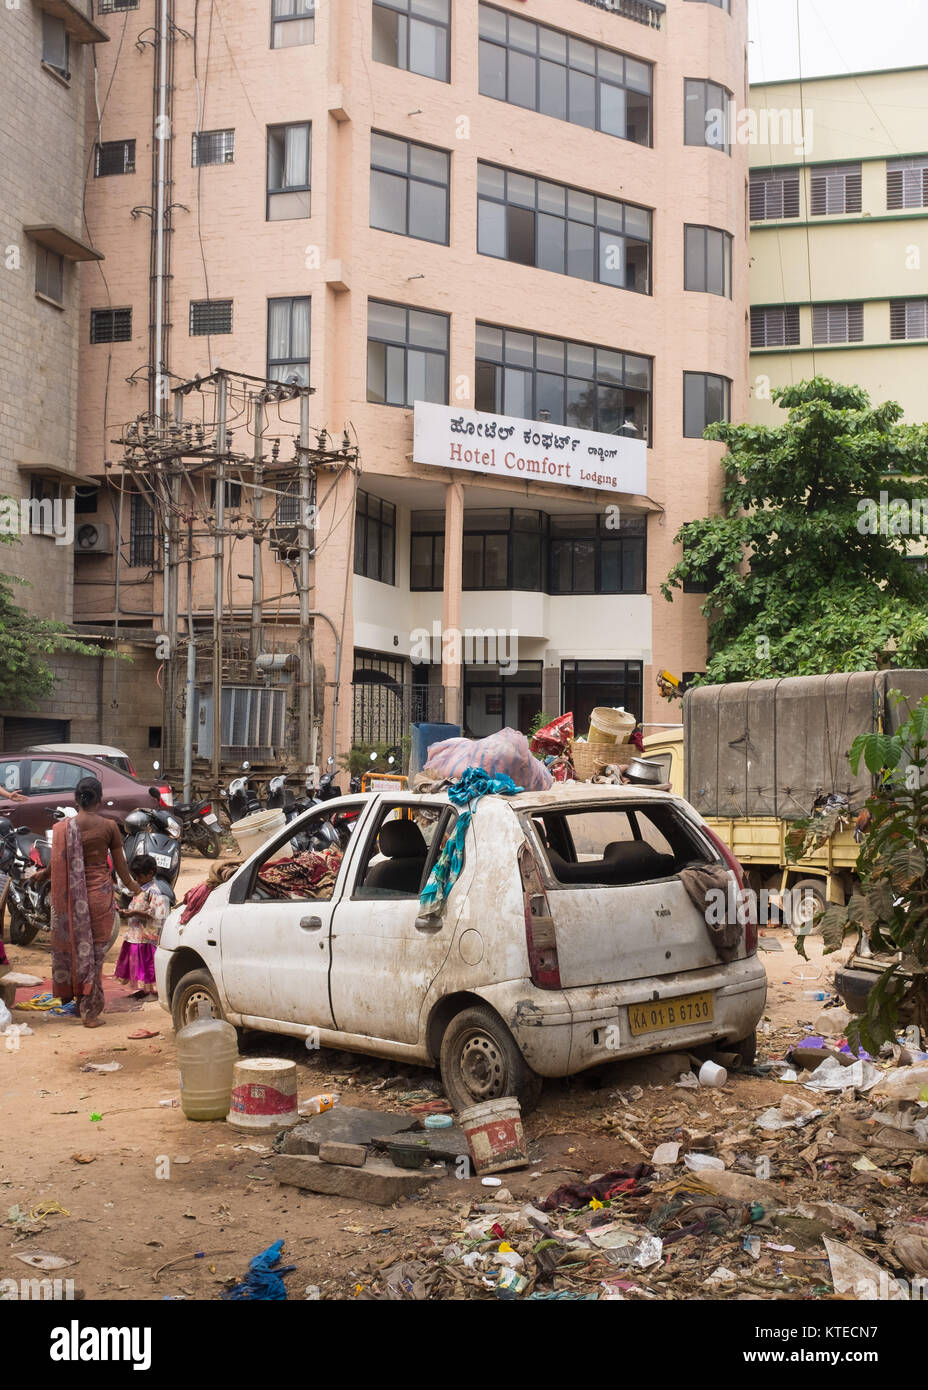 Old car and litter in front of hotel, Bangalore, Karnataka, India. Stock Photo